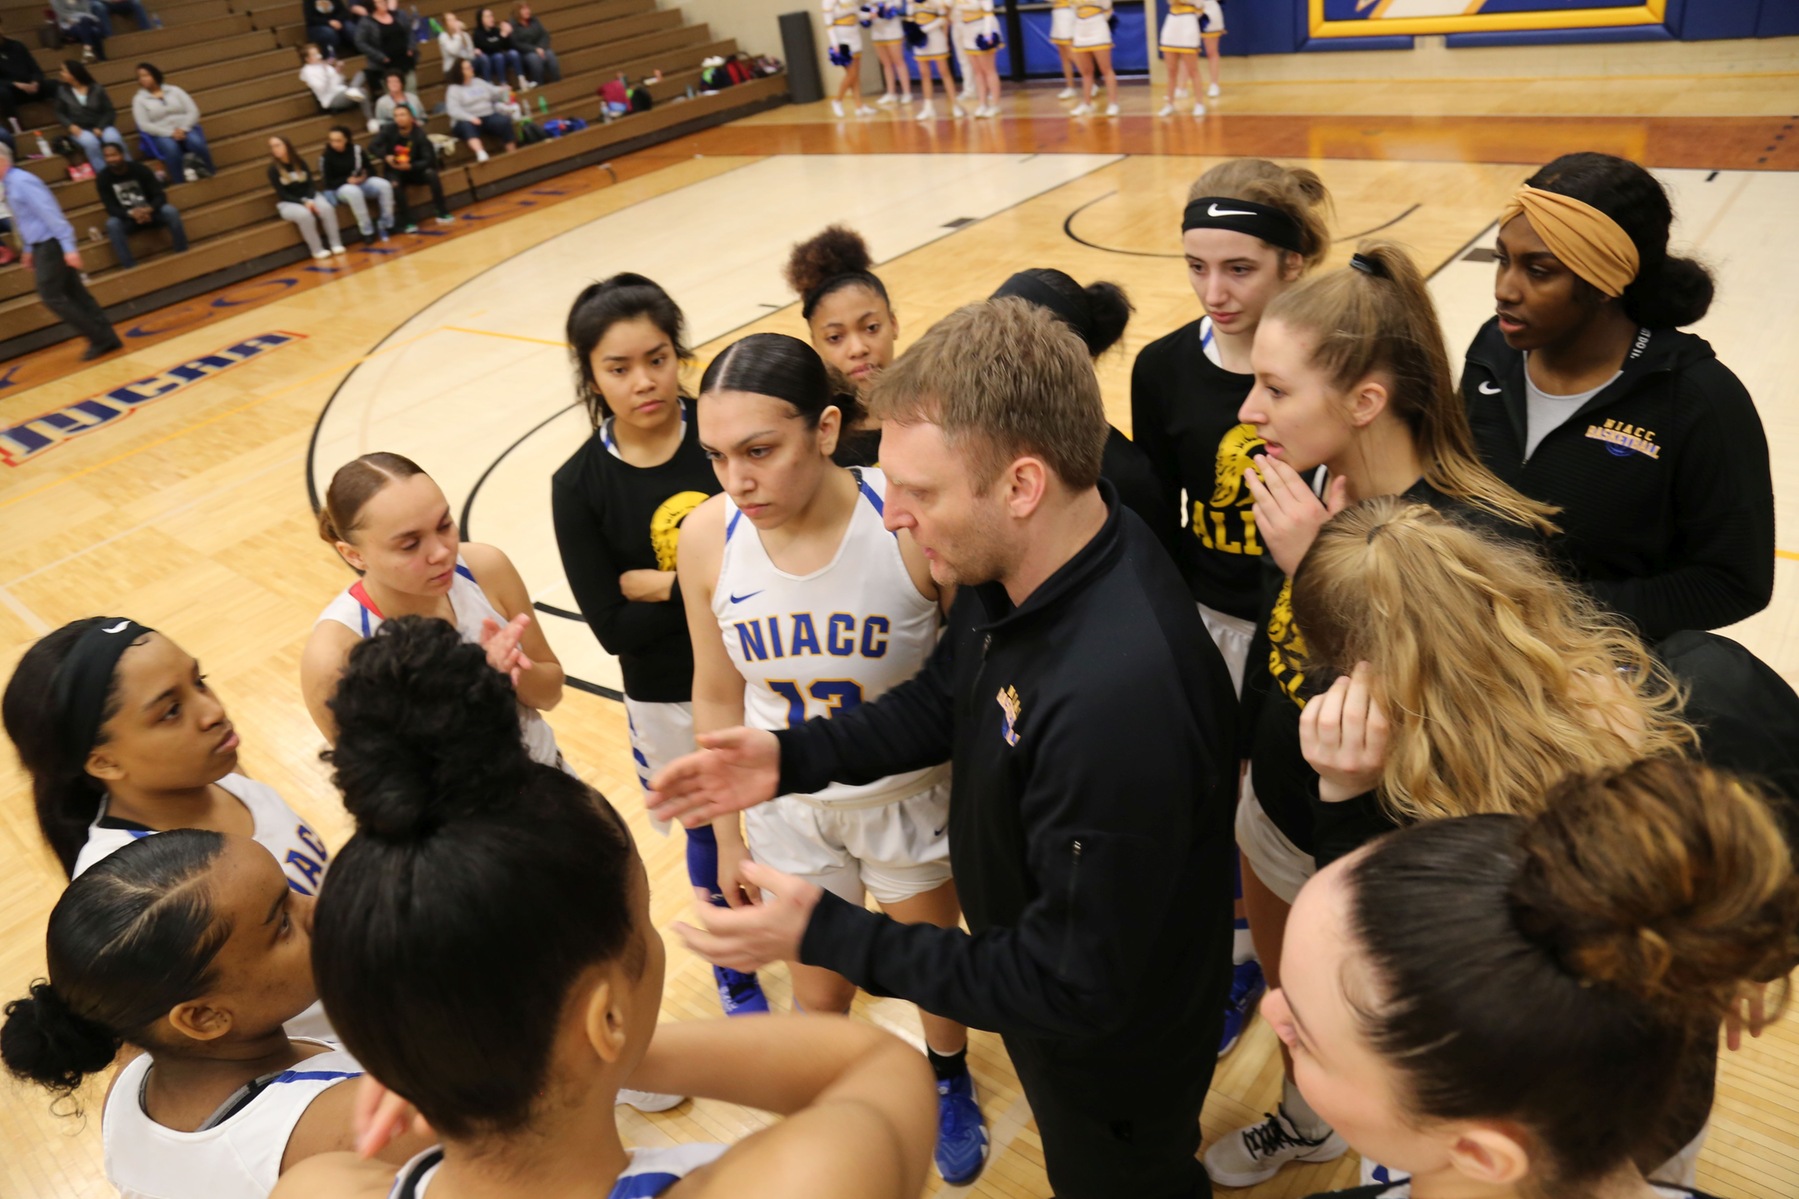 Todd Ciochetto compiled a record of 153-46 in six seasons at NIACC.